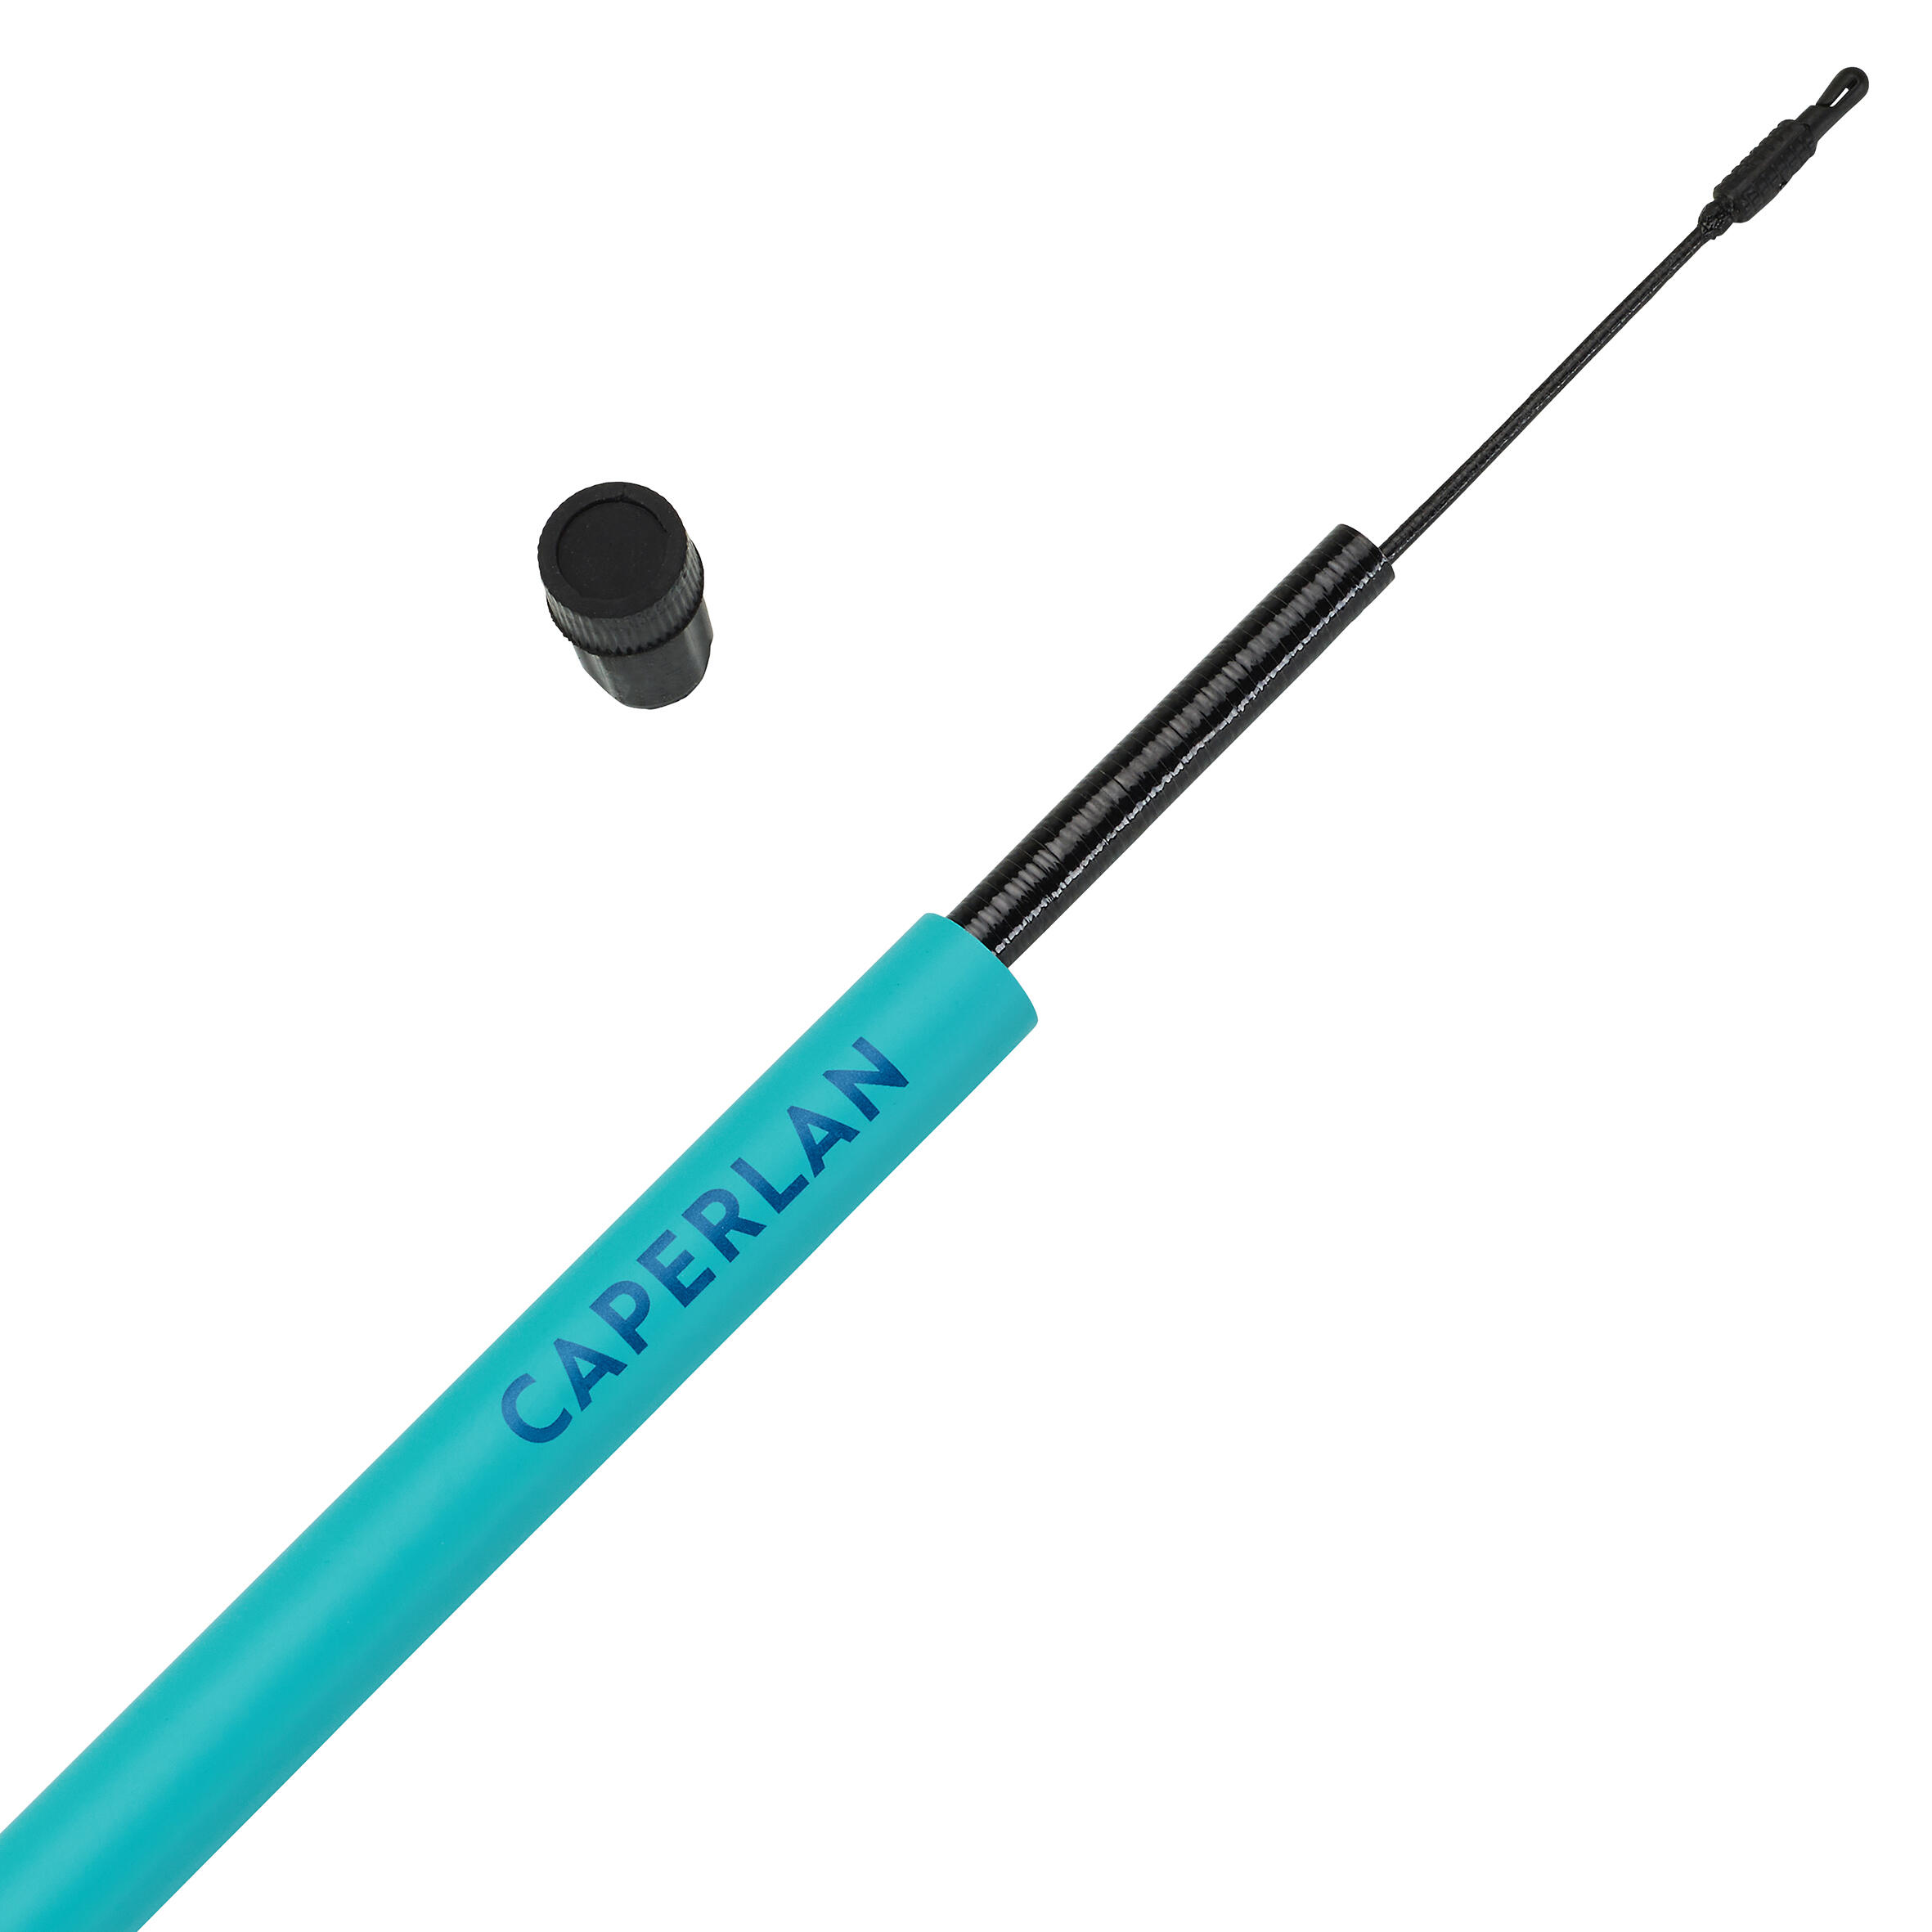 FIRSTFISH 300 Rod + Fly-line outfit for still fishing. - CAPERLAN